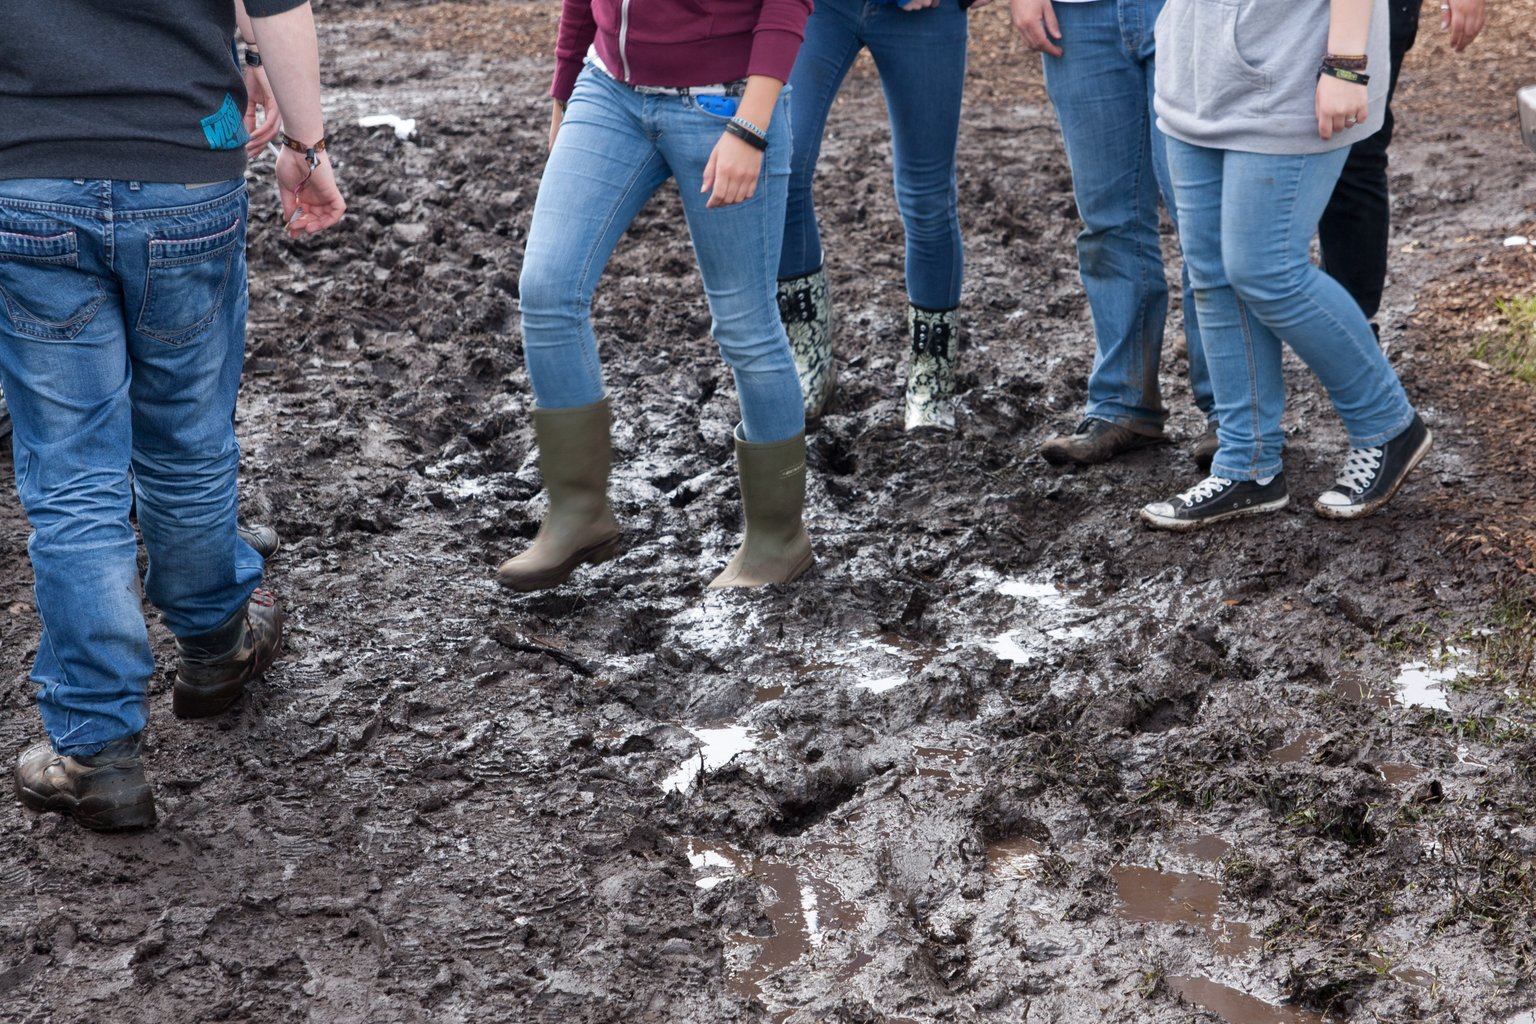 Legs of people at a festival in rubber boots walking through mud